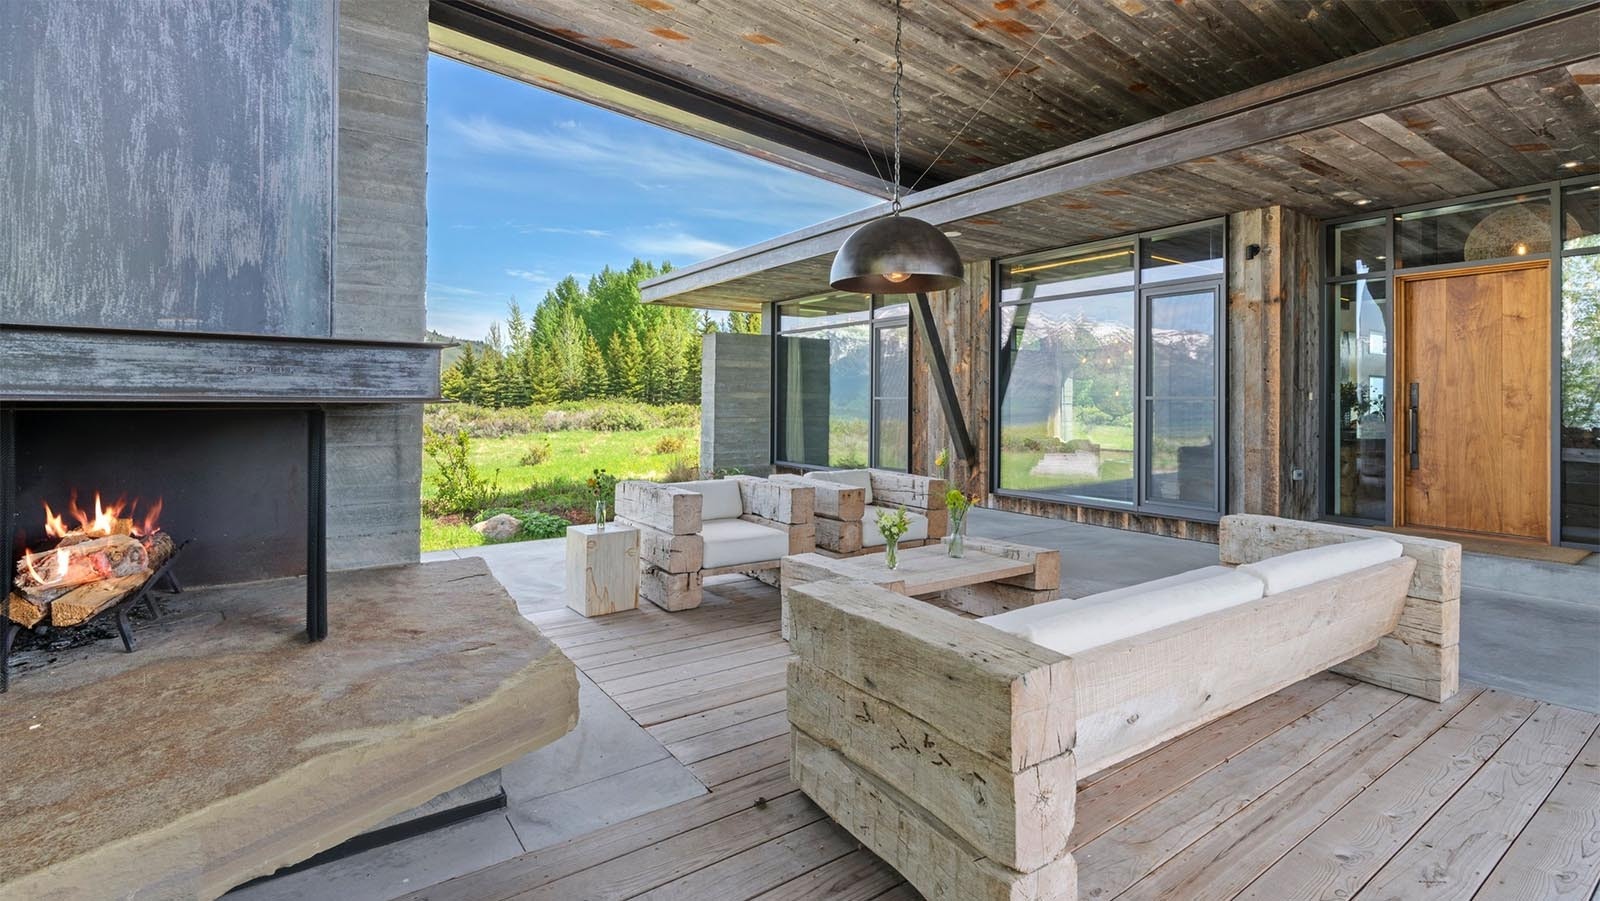 The $13 million geothermal home features spaces open to the Tetons.